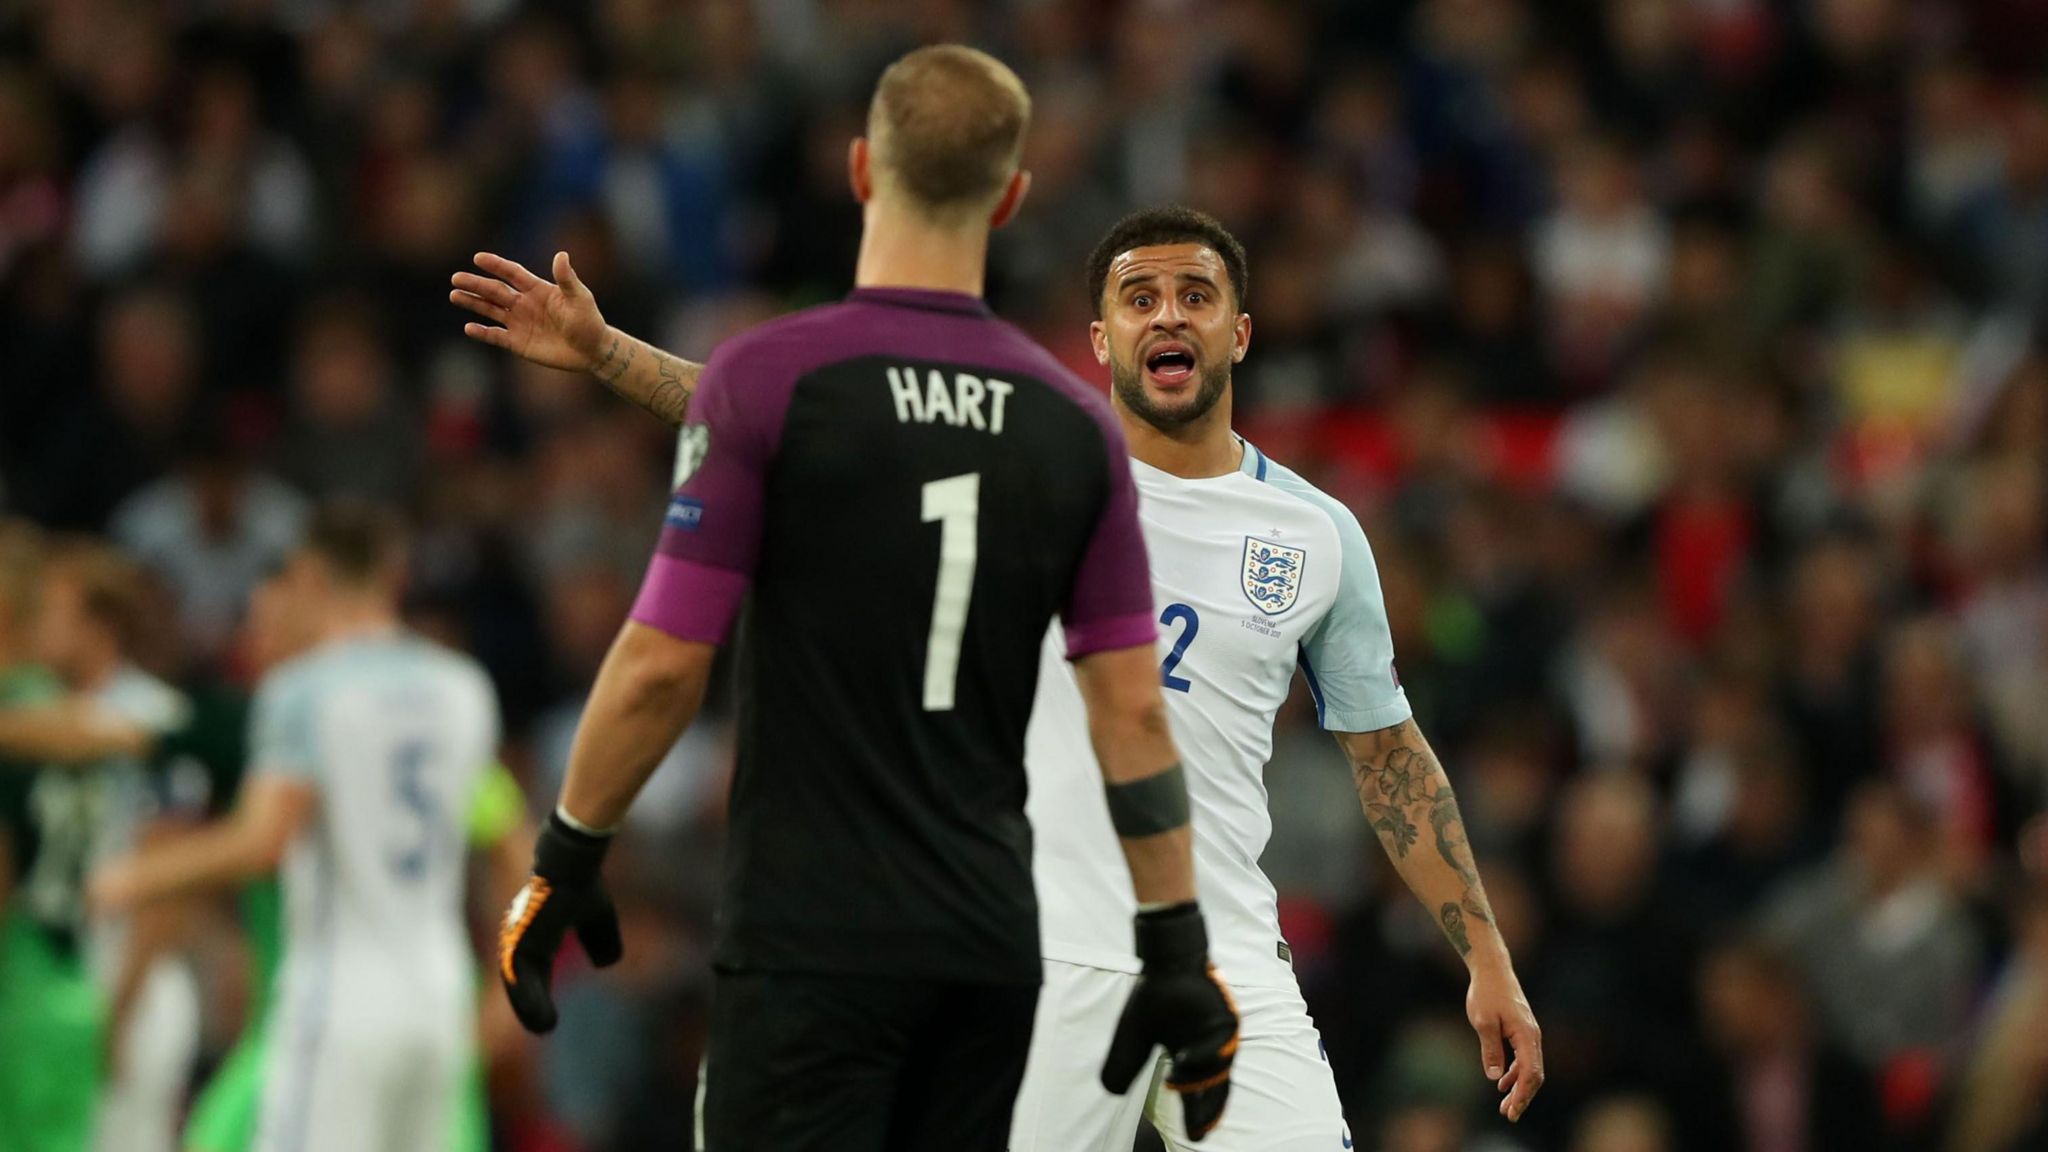 Joe Hart and Kyle Walker in action for England against Slovenia in 2017